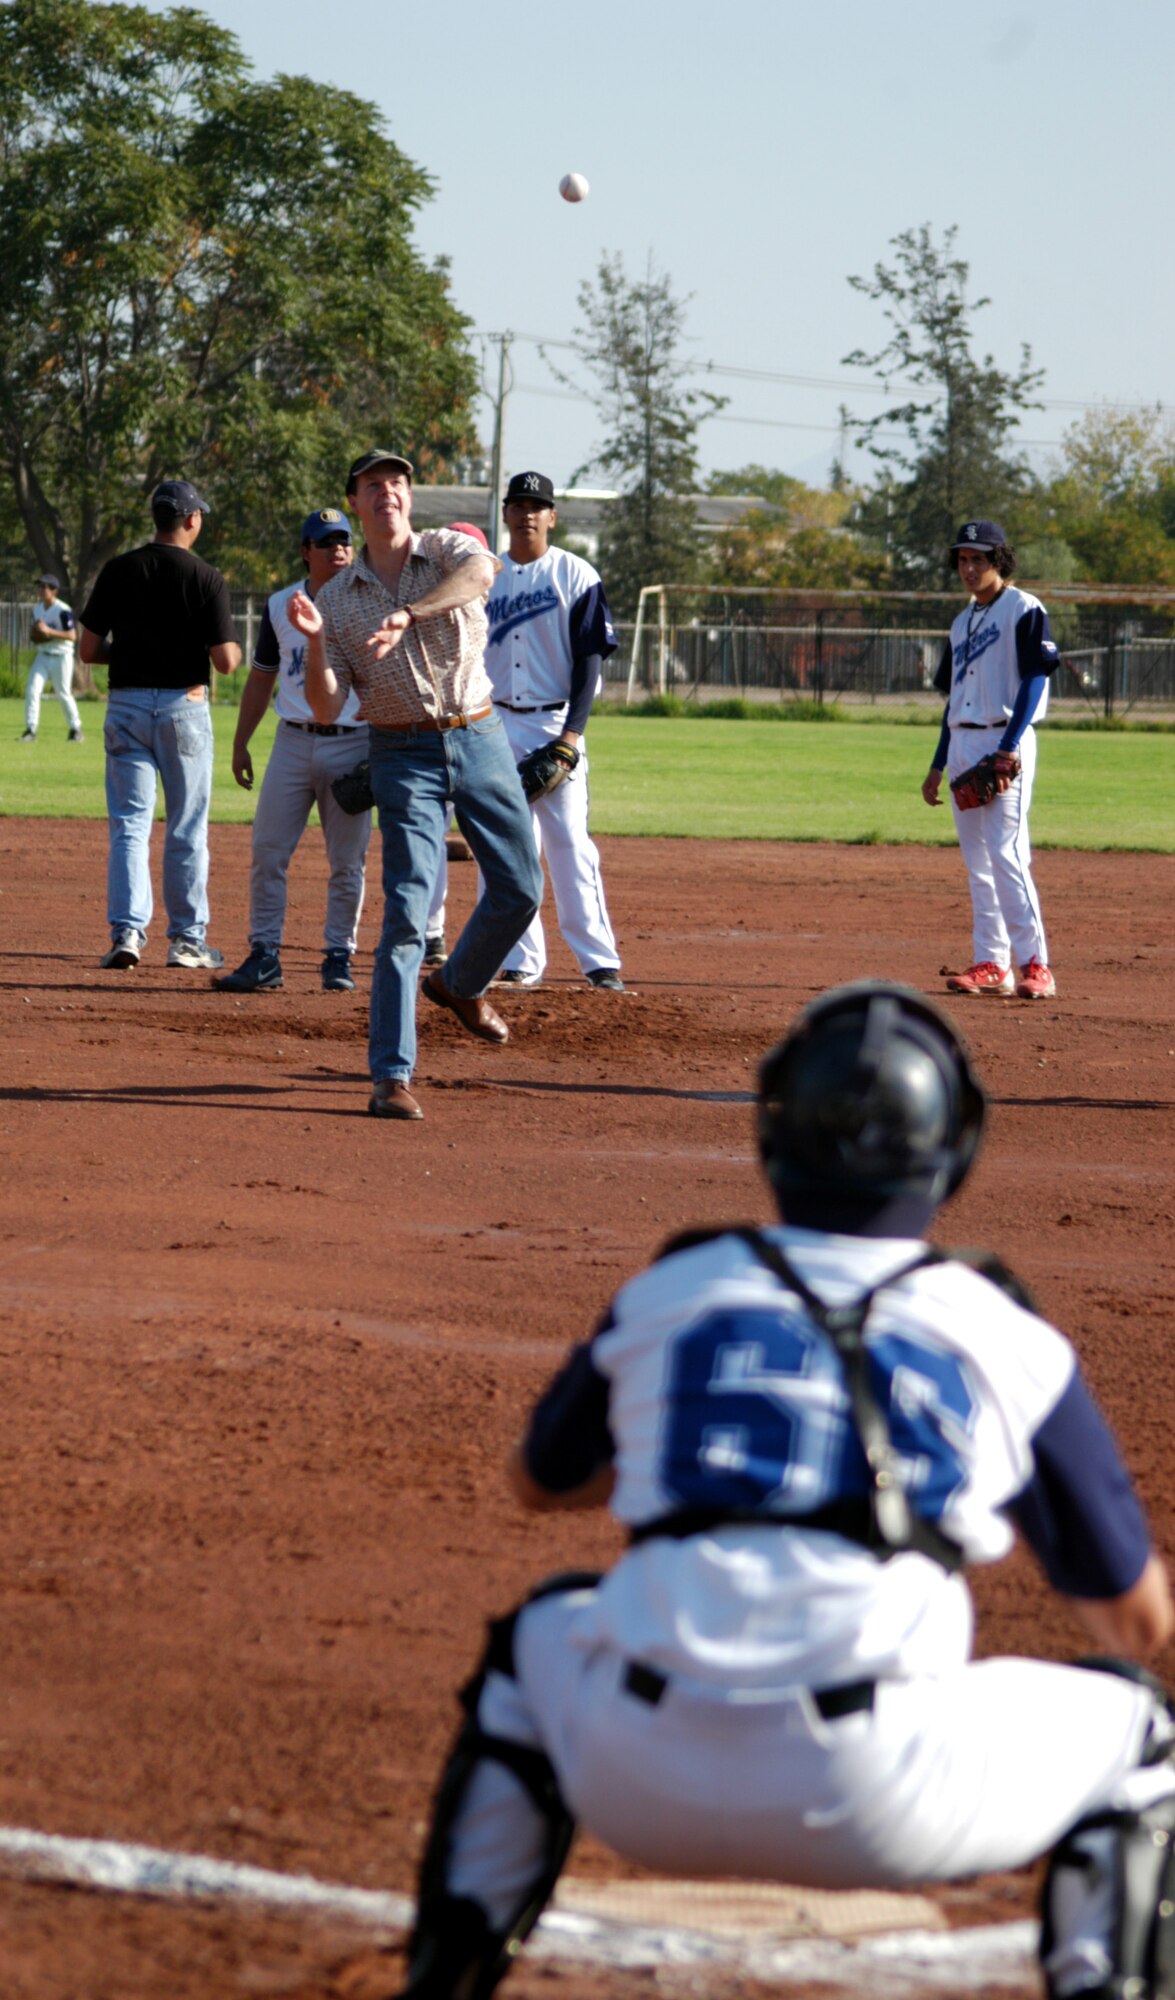 SANTIAGO, Chile -- U.S. Ambassador to Chile Paul Simons throws out the first pitch of a baseball game between American Airmen and Chilean Little Leaguers April 5.  The Chileans won the informal event 8-5.  During the game, the Air National Guard Band of the Central States played music, and dozens of shirts donated by the Colorado Rockies were given to children and fans. (U.S. Air Force photo/Master Sgt. Jason Tudor)